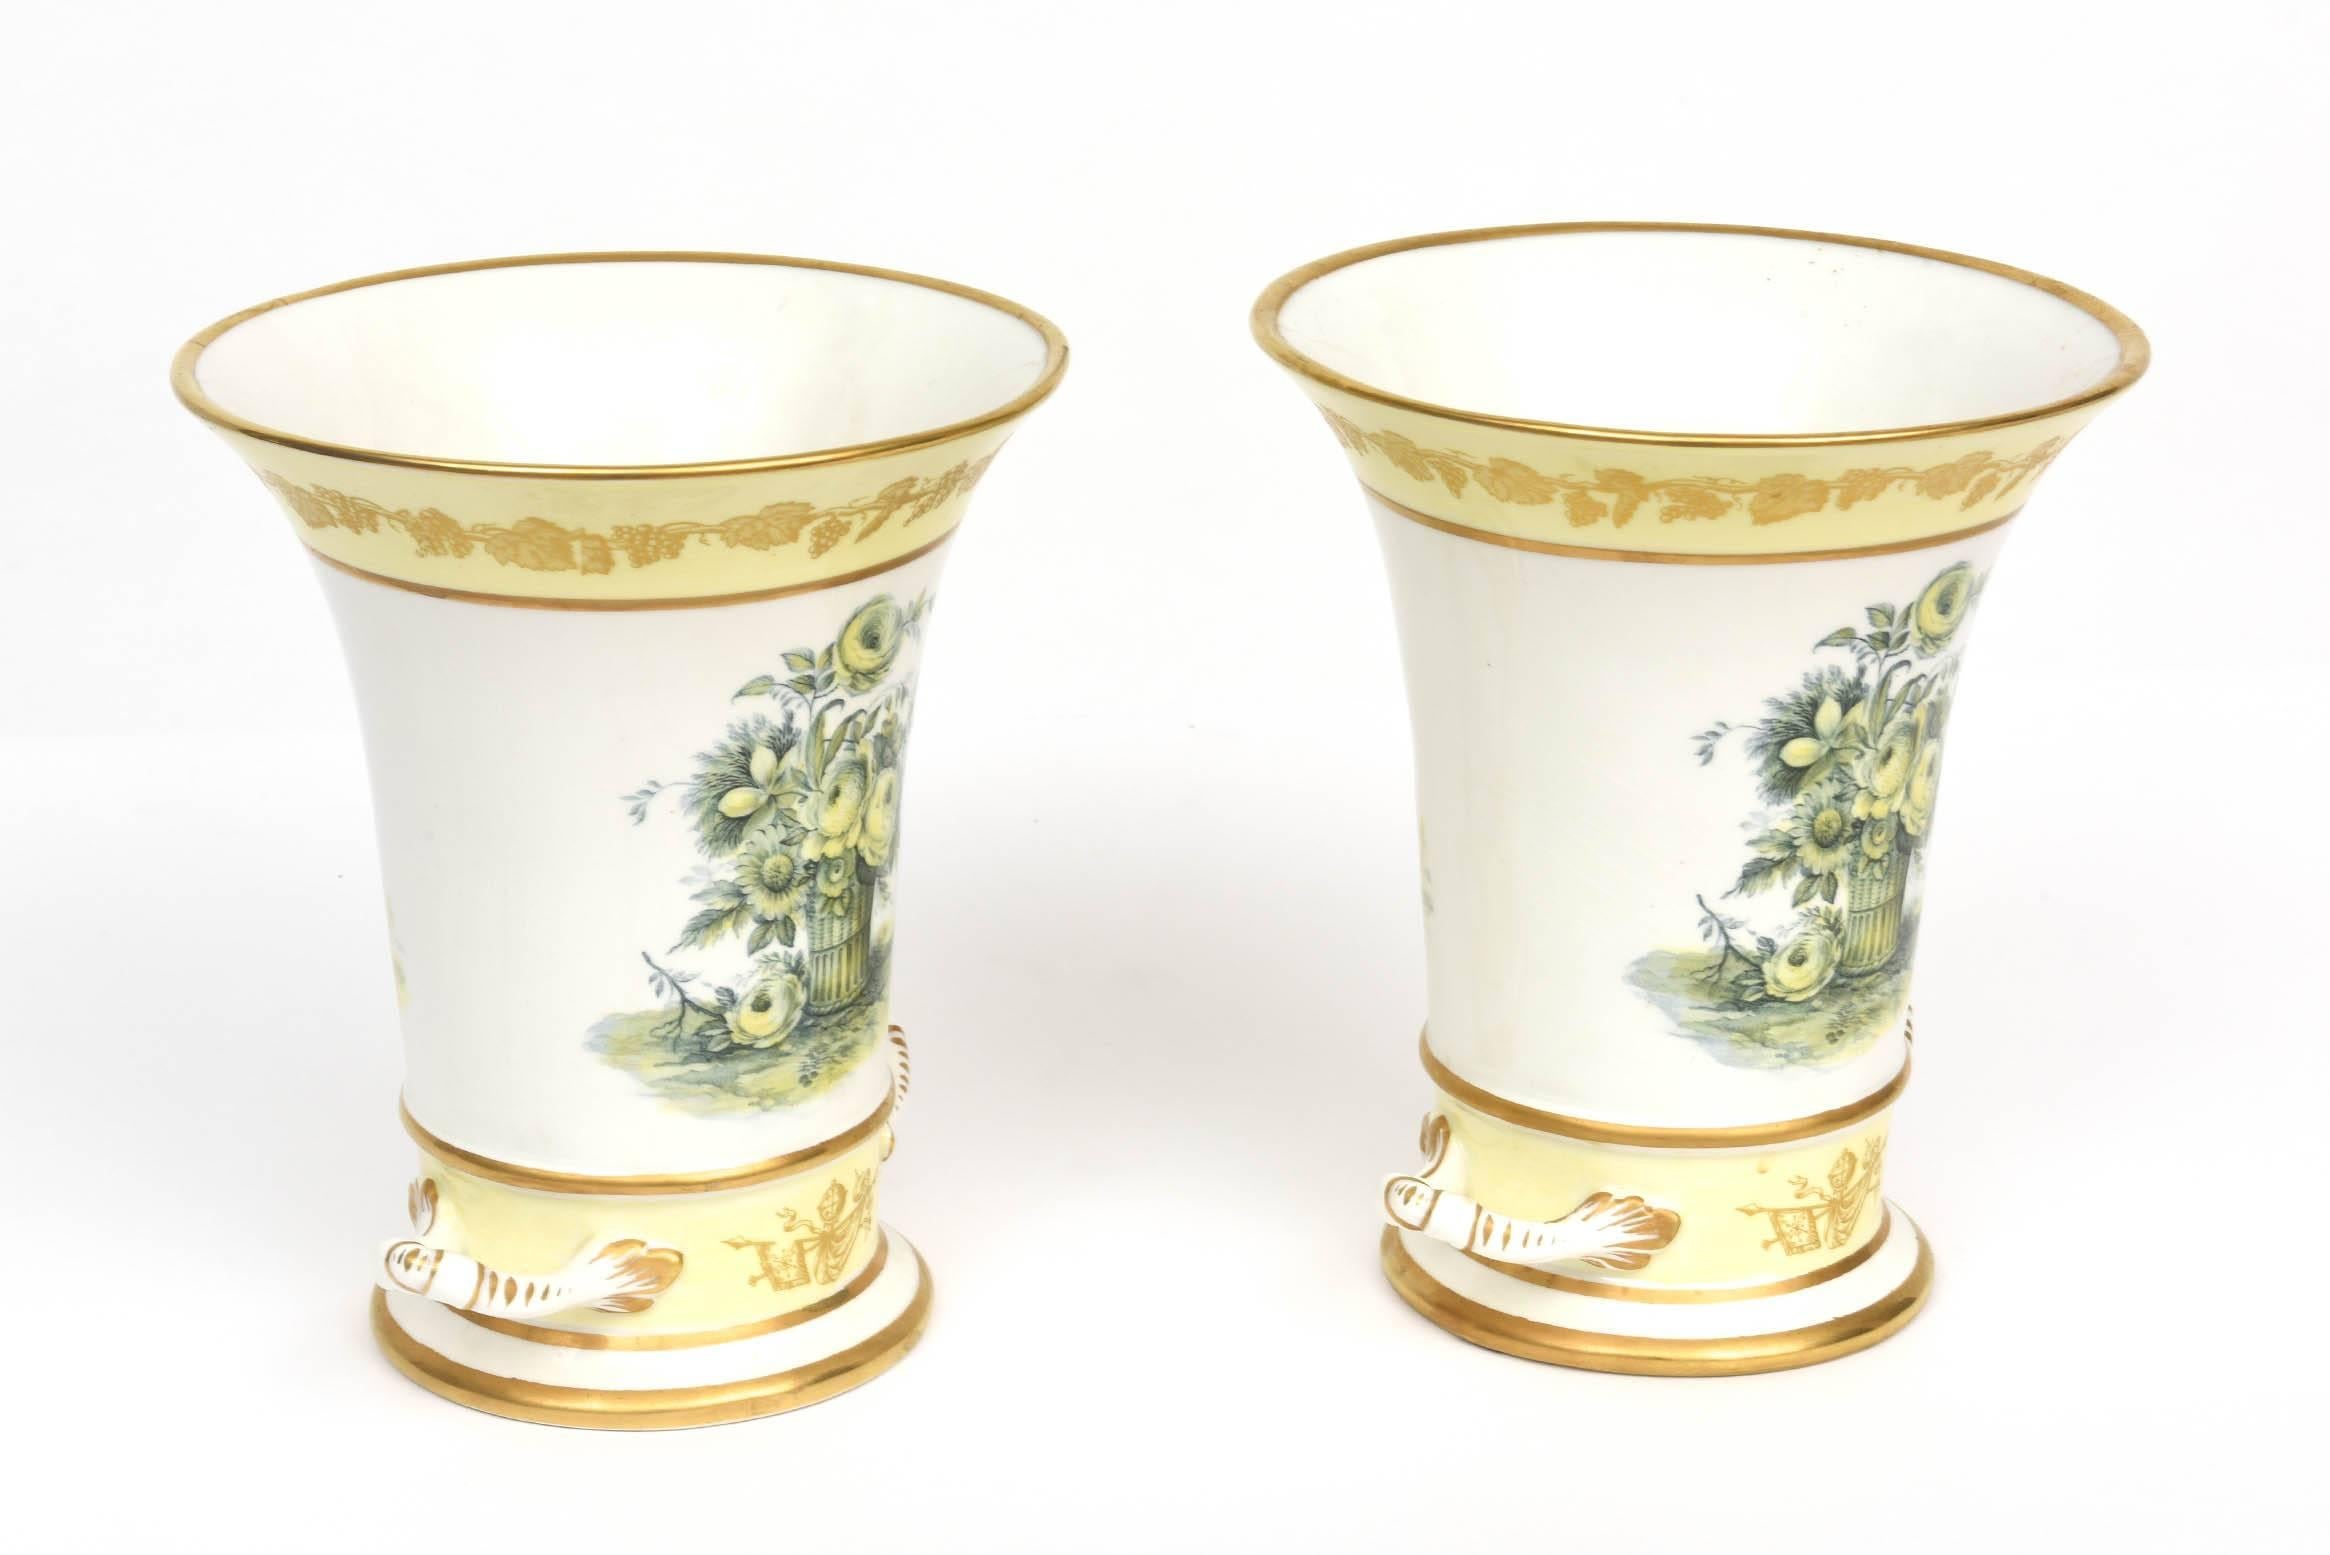 A versatile pair of vases, classically decorated in yellow roses with a great shape. Please see our other coordinating pieces in this pattern. Very nice vintage condition.